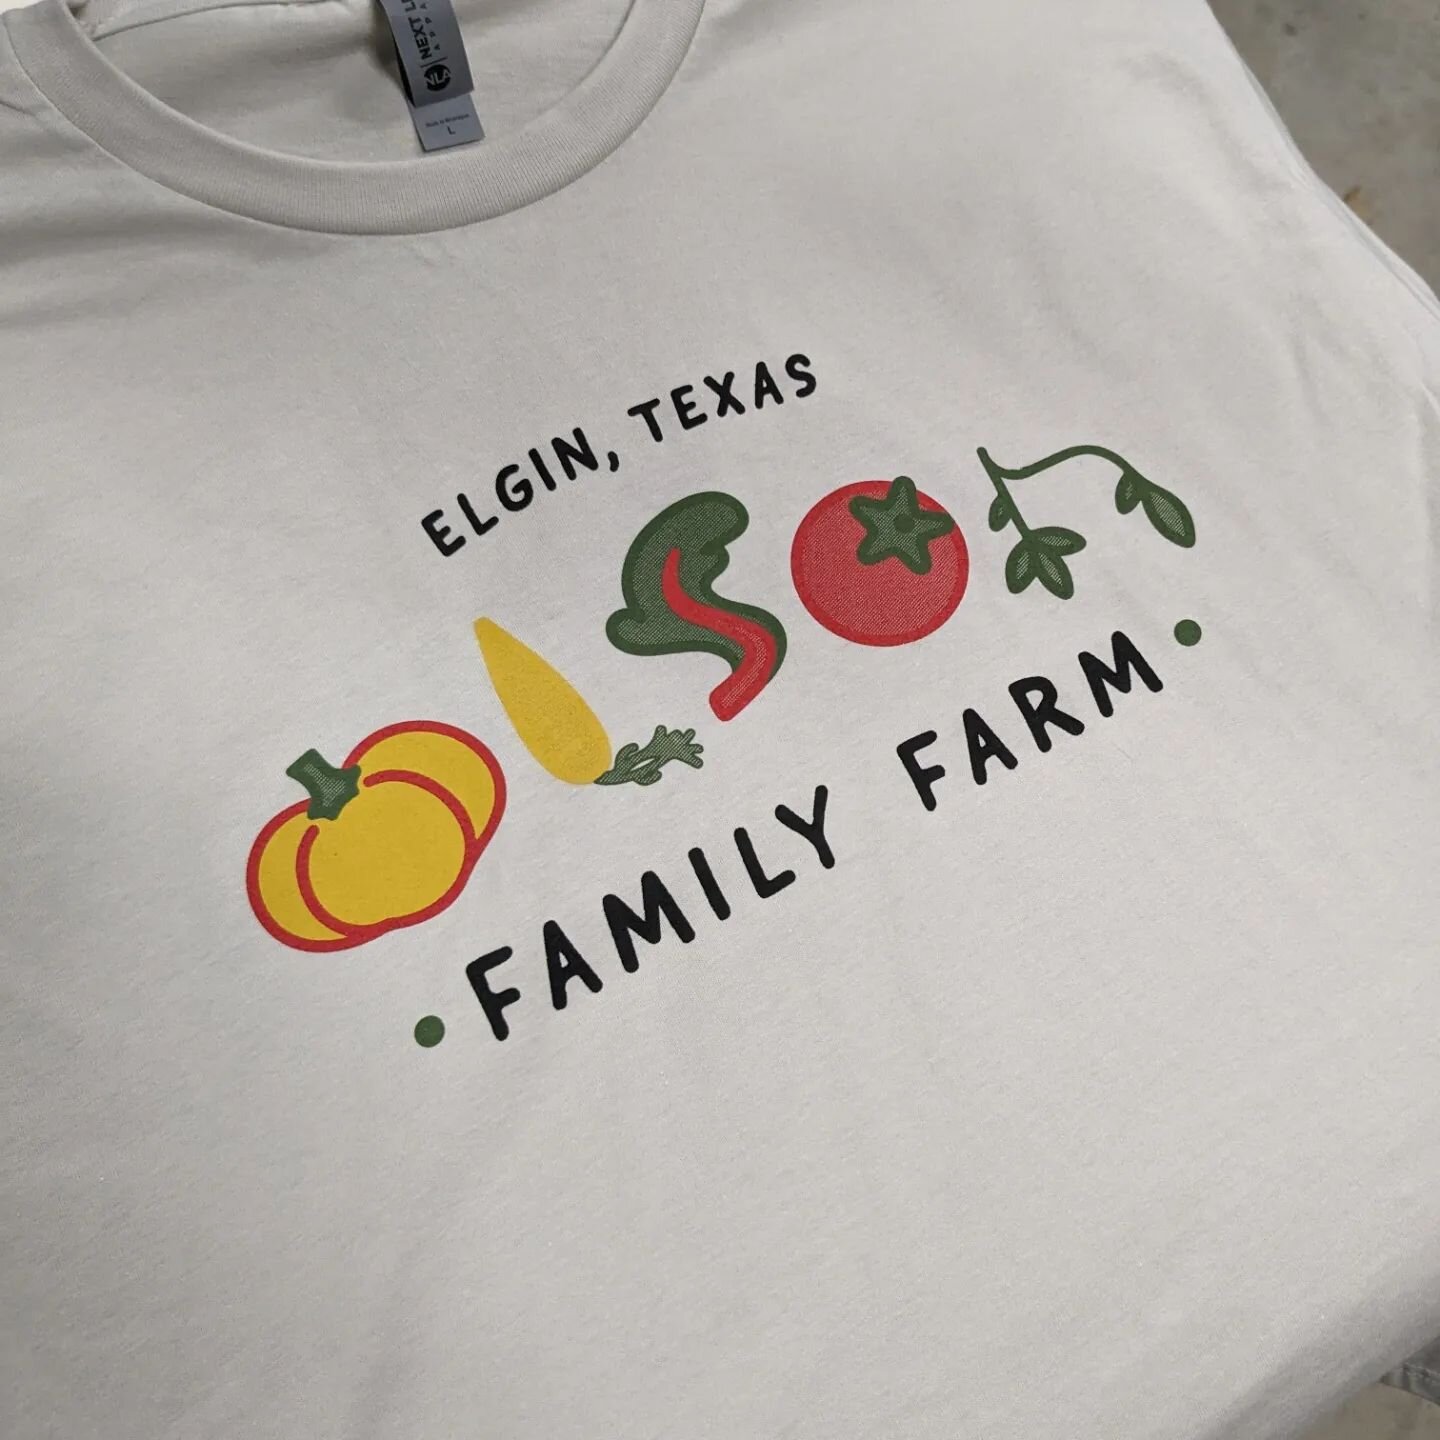 Had a fun week in the print studio:
Olson Family Farms: an awesome fam that grows incredible produce
Bastrop Chamber: special shirts for their annual gala
Butler Contracting: local contracting heroes
Bearded Baking Company: hot new local downtown bak